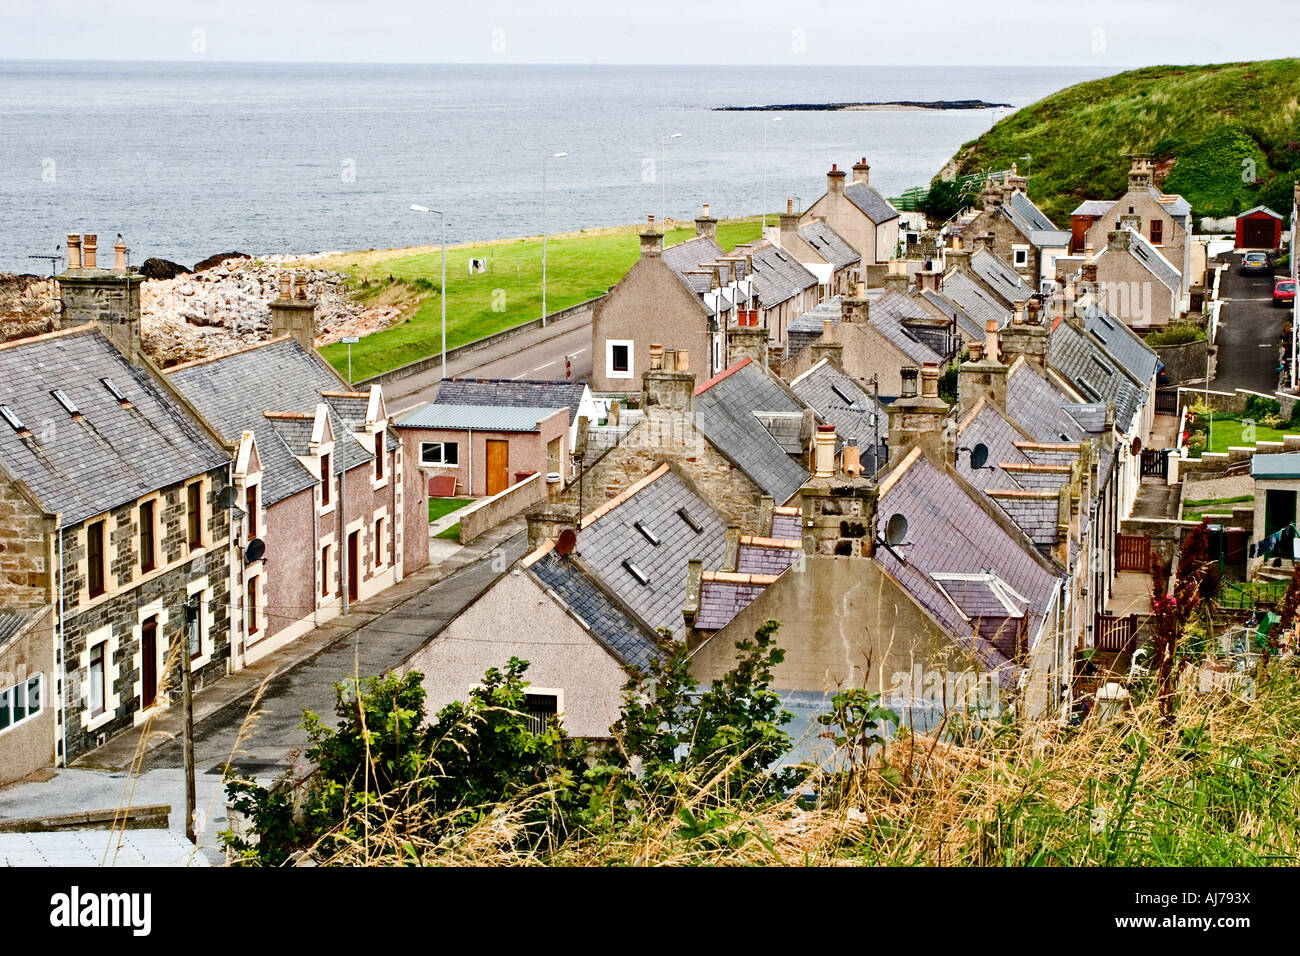 The rooftops of fisher houses, Buckie, Moray, Scotland with the Moray Firth and the island of Craigenroan in the background. Stock Photo